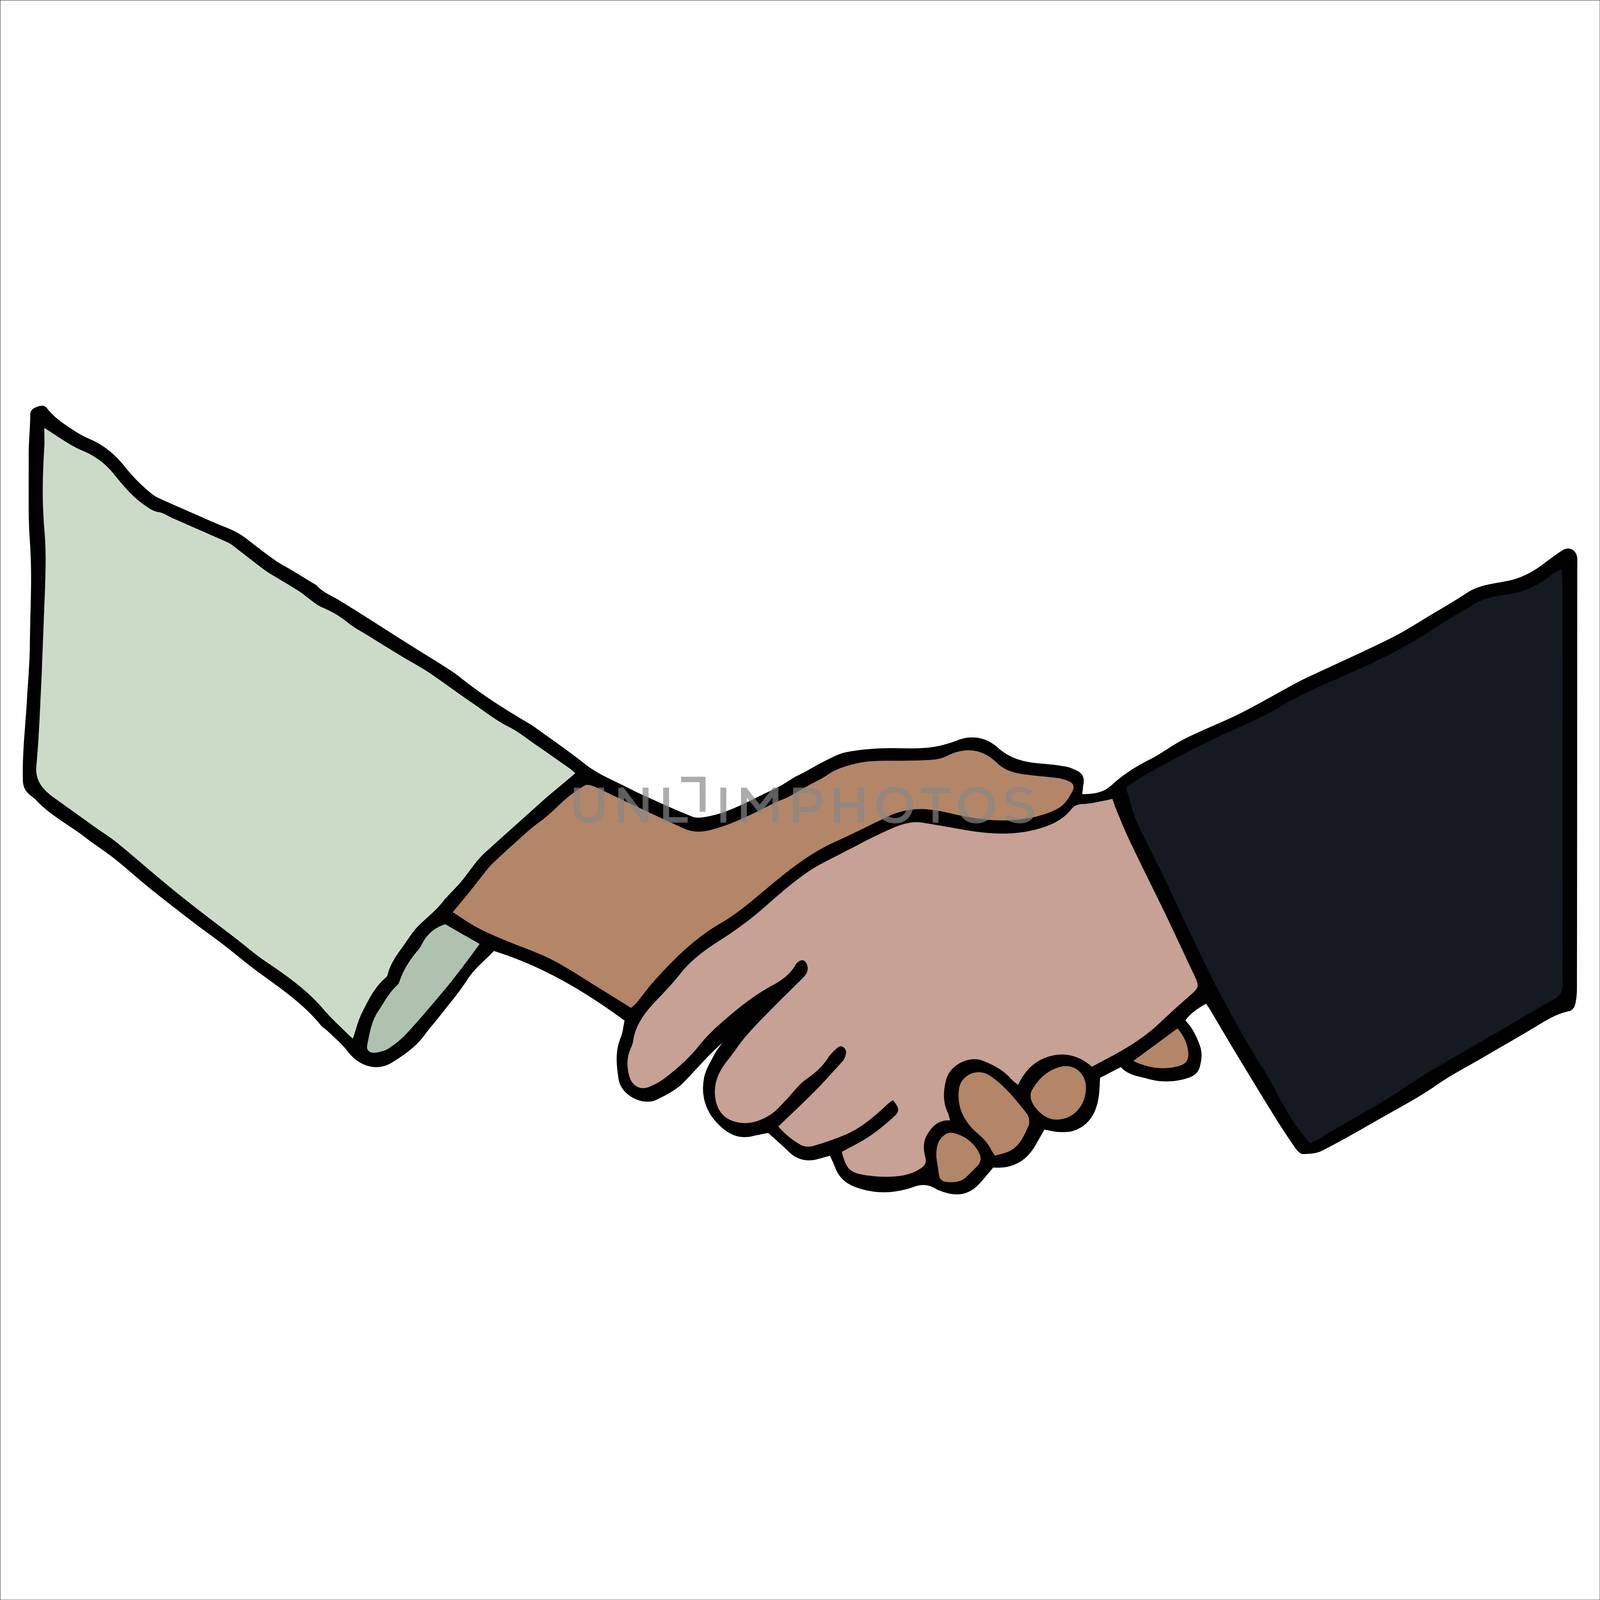 Businesspeople shaking hands against white background by Wavebreakmedia